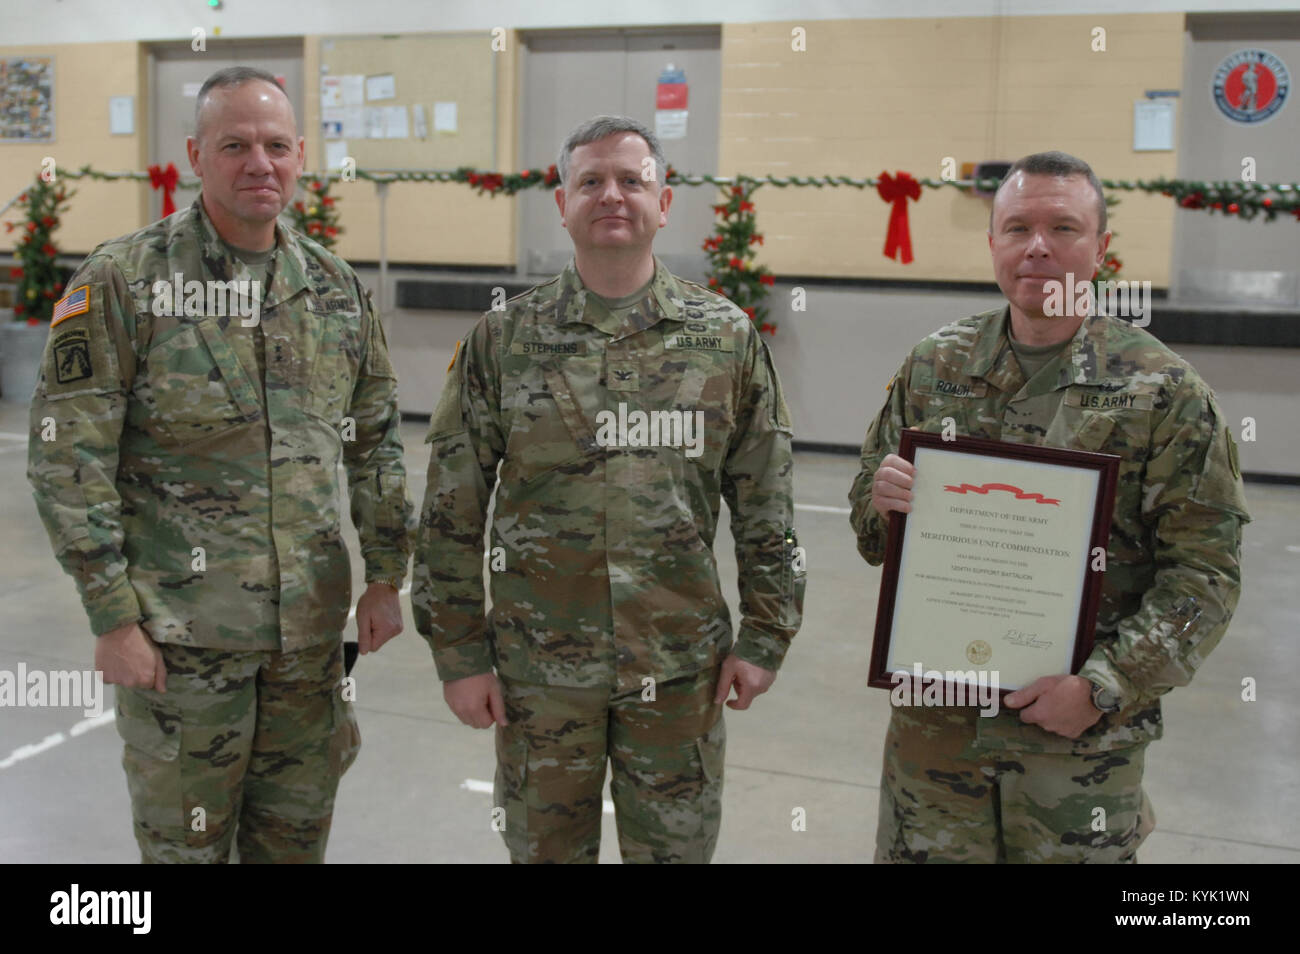 Maj. Gen. Hogan presents the Meritorious Unit Commendation to 63rd TAB Commander Col. Michael Stephens and former 1204th Commander LTC Tom Roach at Wellman Armory, Boone National Guard Center, Frankfort, Ky., Dec. 16, 2016. The MUC has been awarded to the 1204th Aviation Support Battalion for meritorious service in support of military operations from 23 August 2011 to 10 August 2012. (U.S. Army National Guard photo by 1st. Lt. Michael Reinersman) Stock Photo